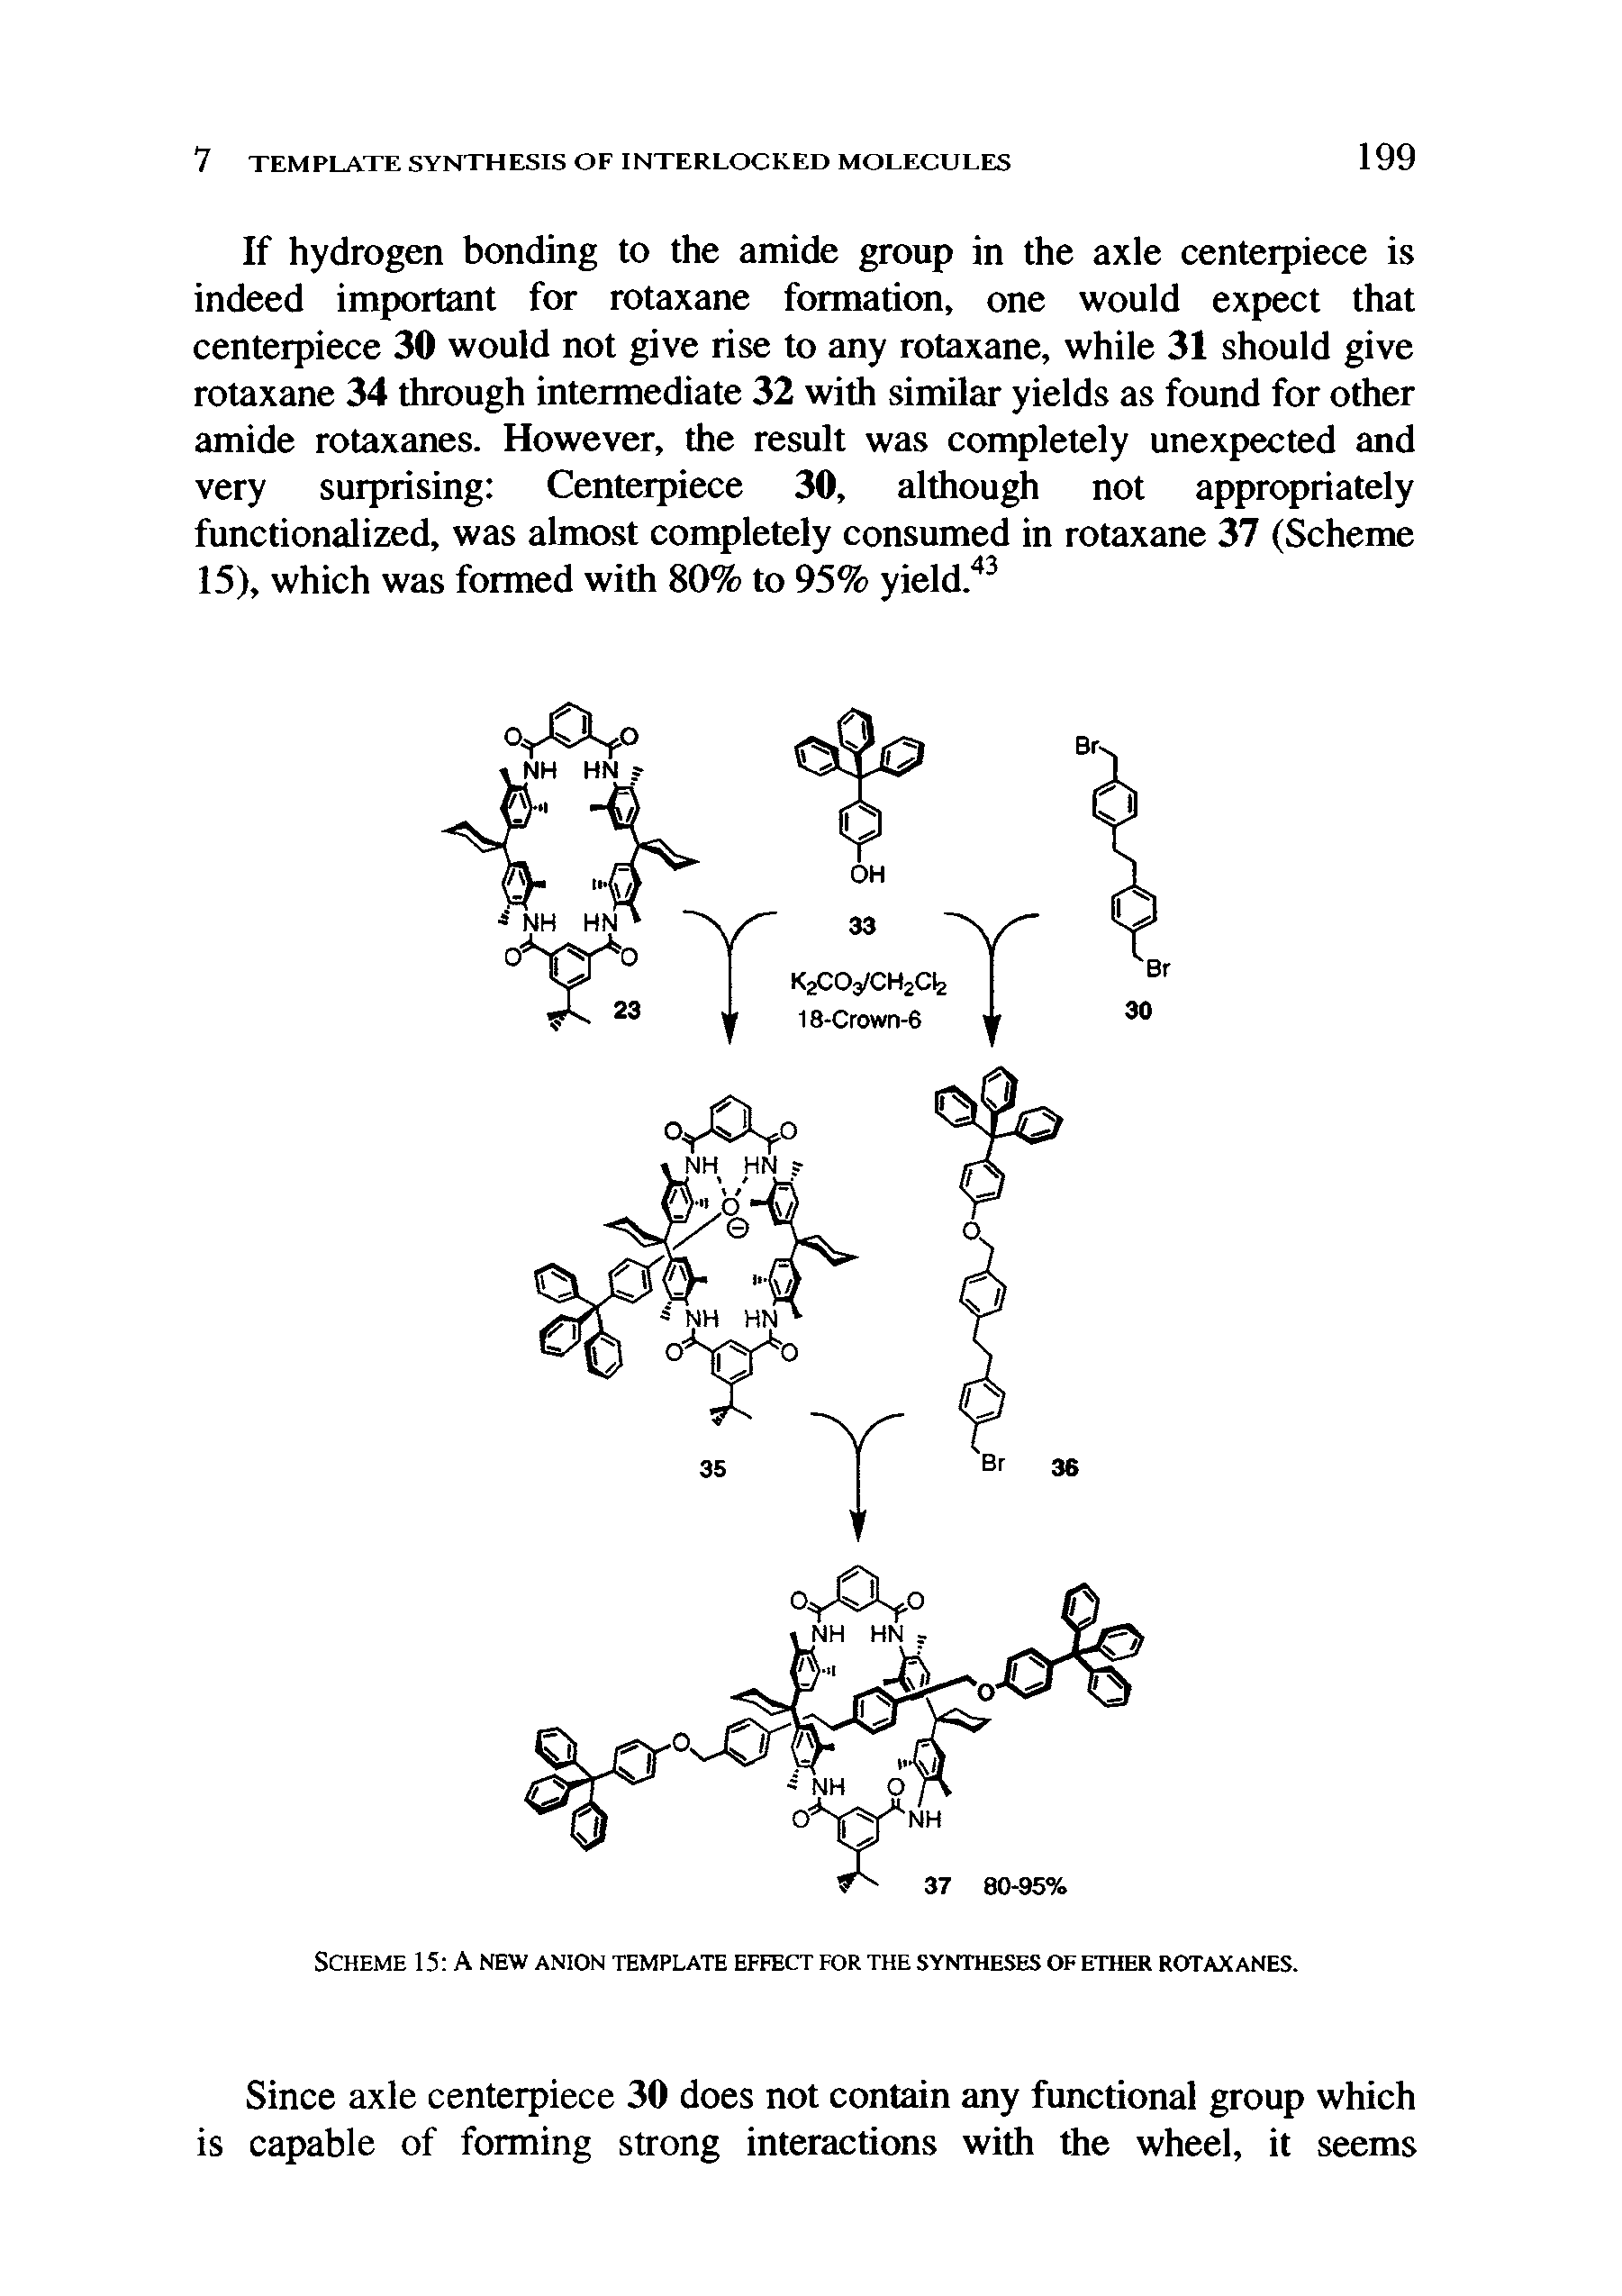 Scheme 15 A new anion template effect for the syntheses of ether rotaxanes.